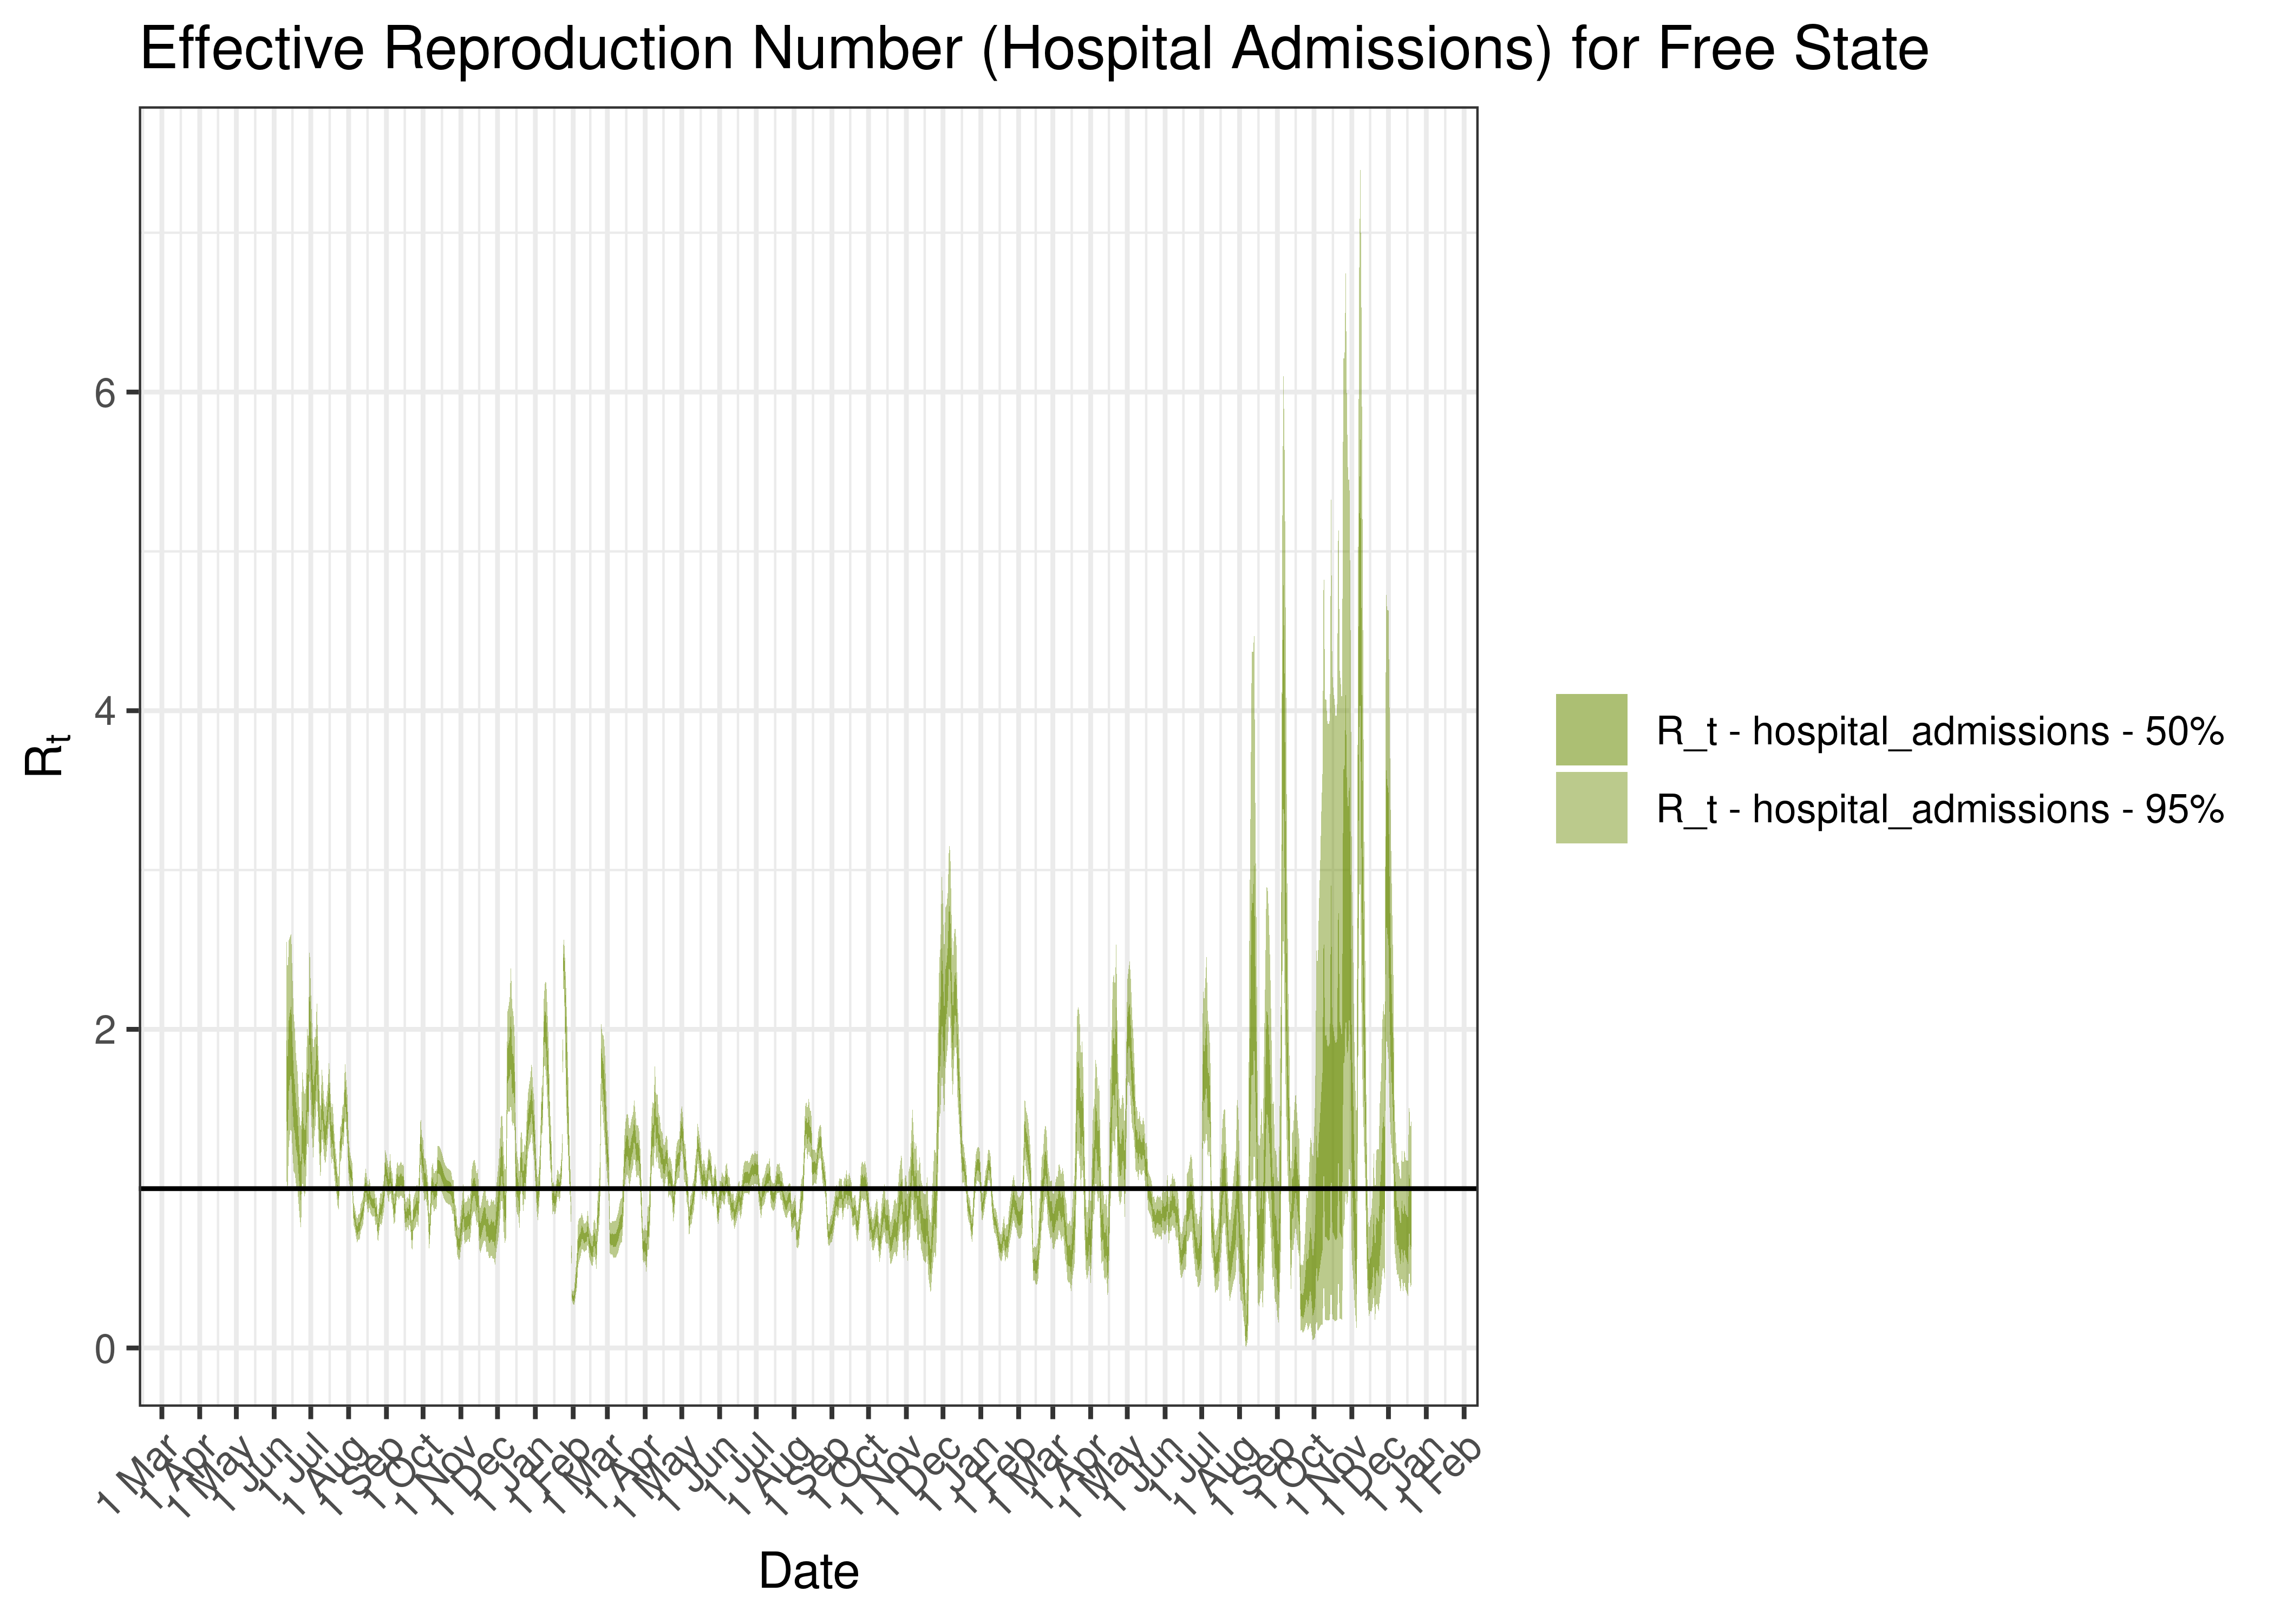 Estimated Effective Reproduction Number Based on Hospital Admissions for Free State since 1 April 2020